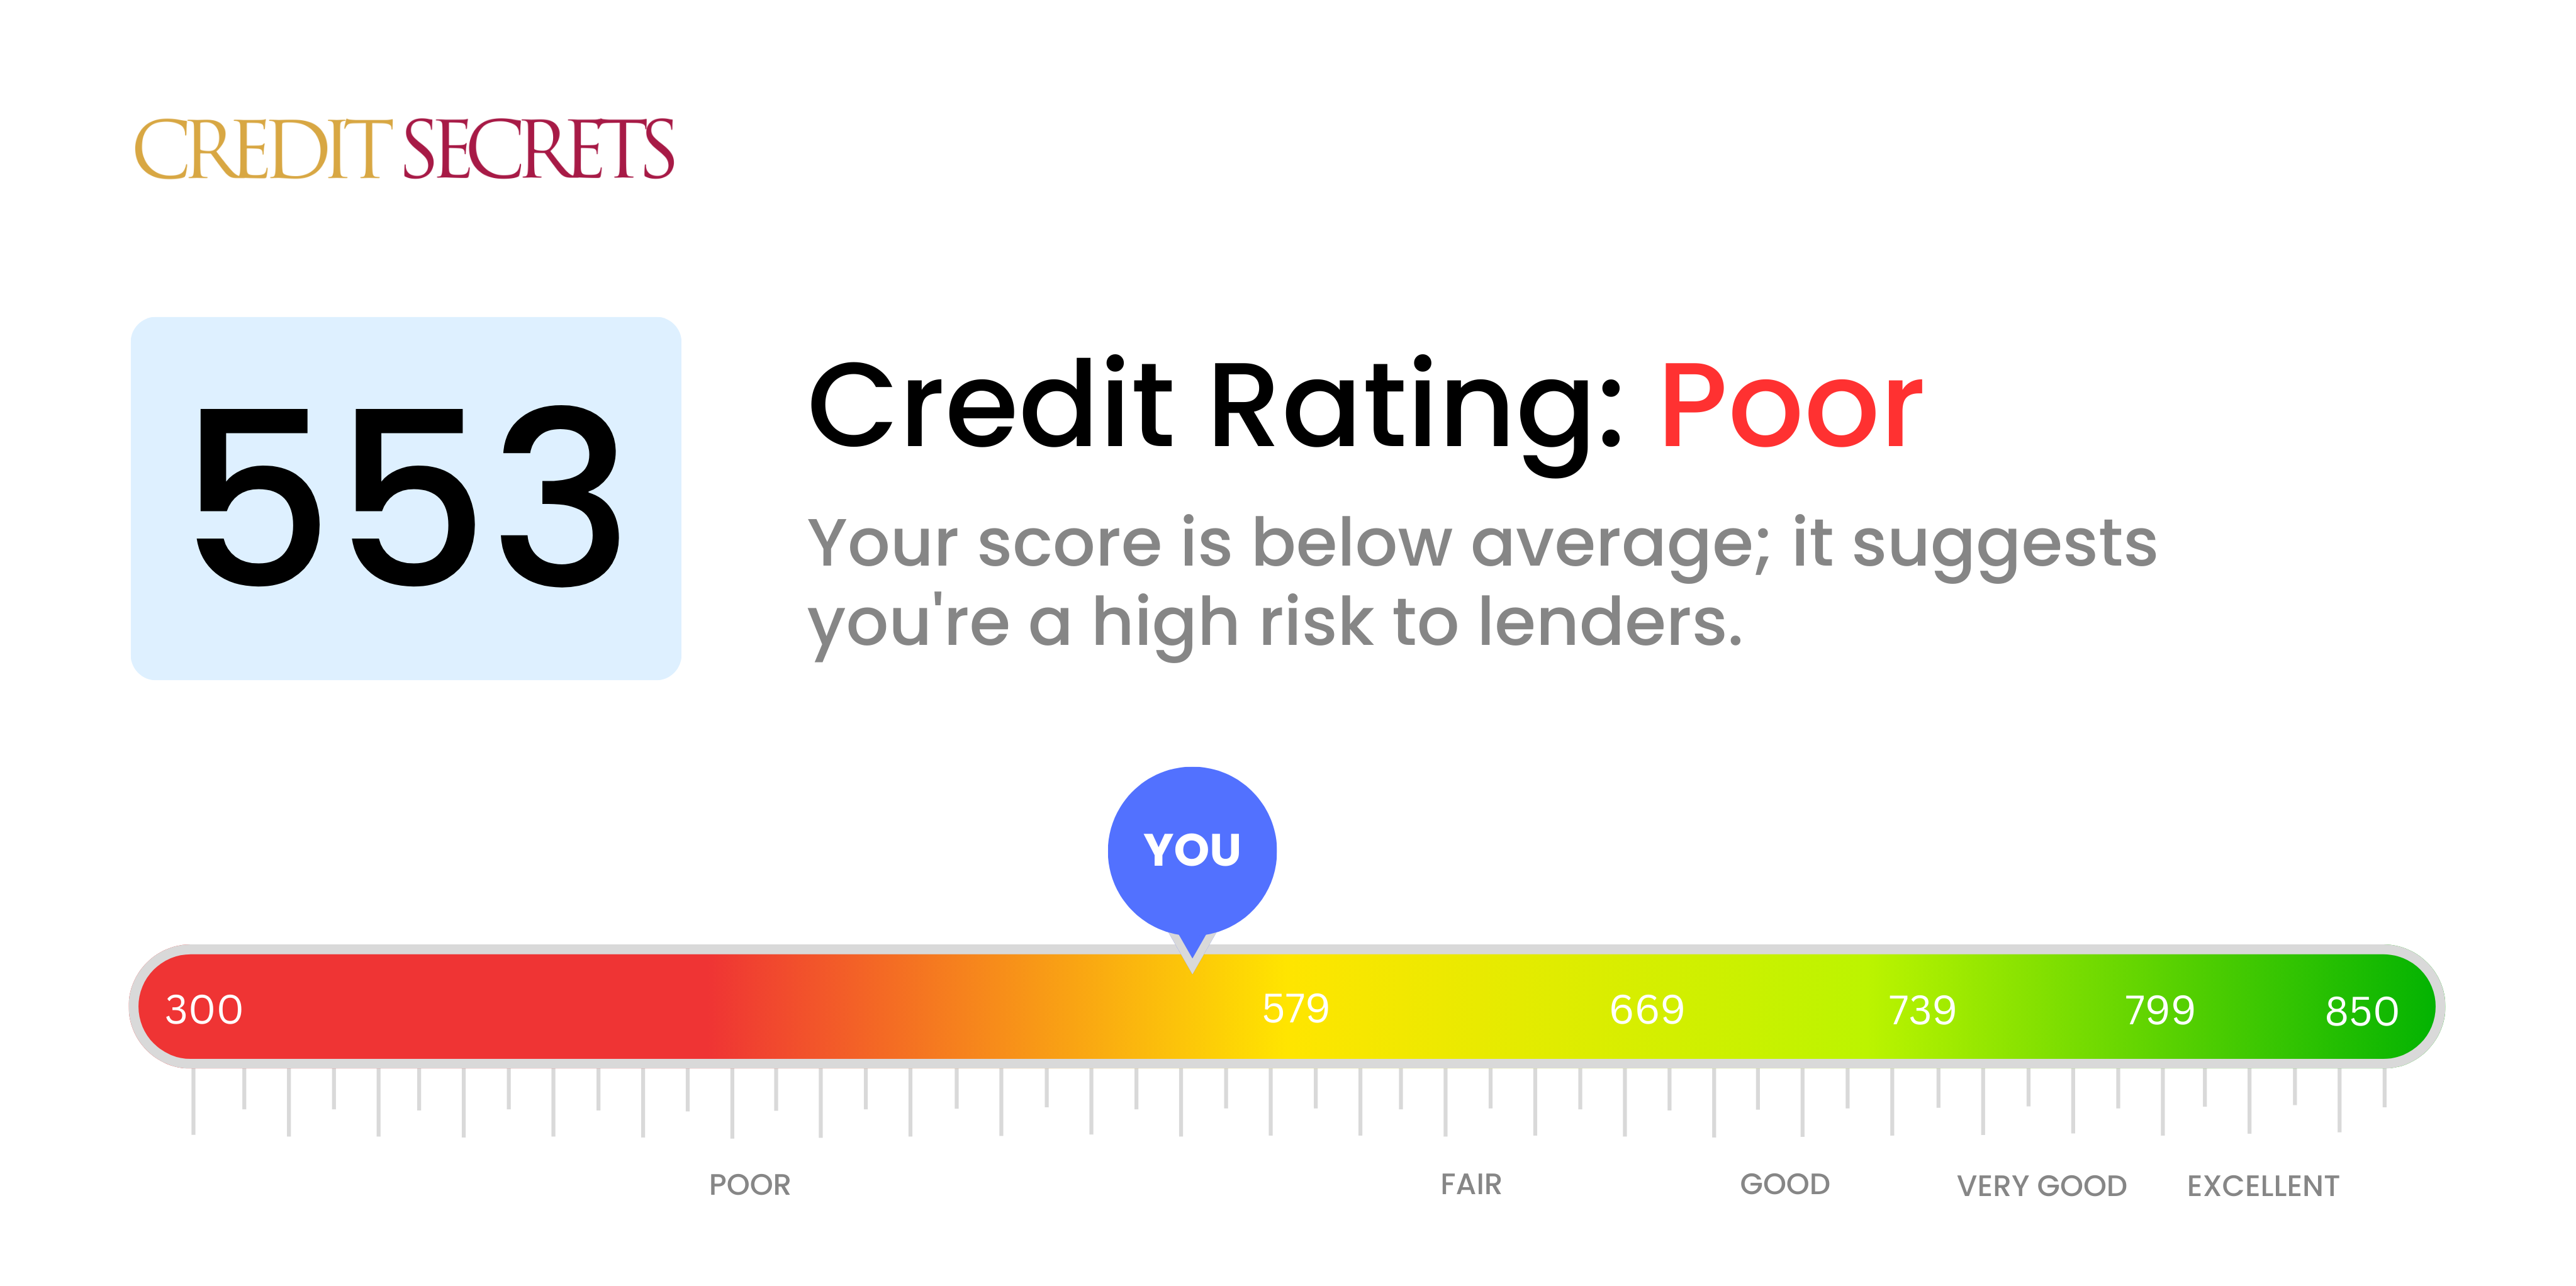 Is 553 a good credit score?